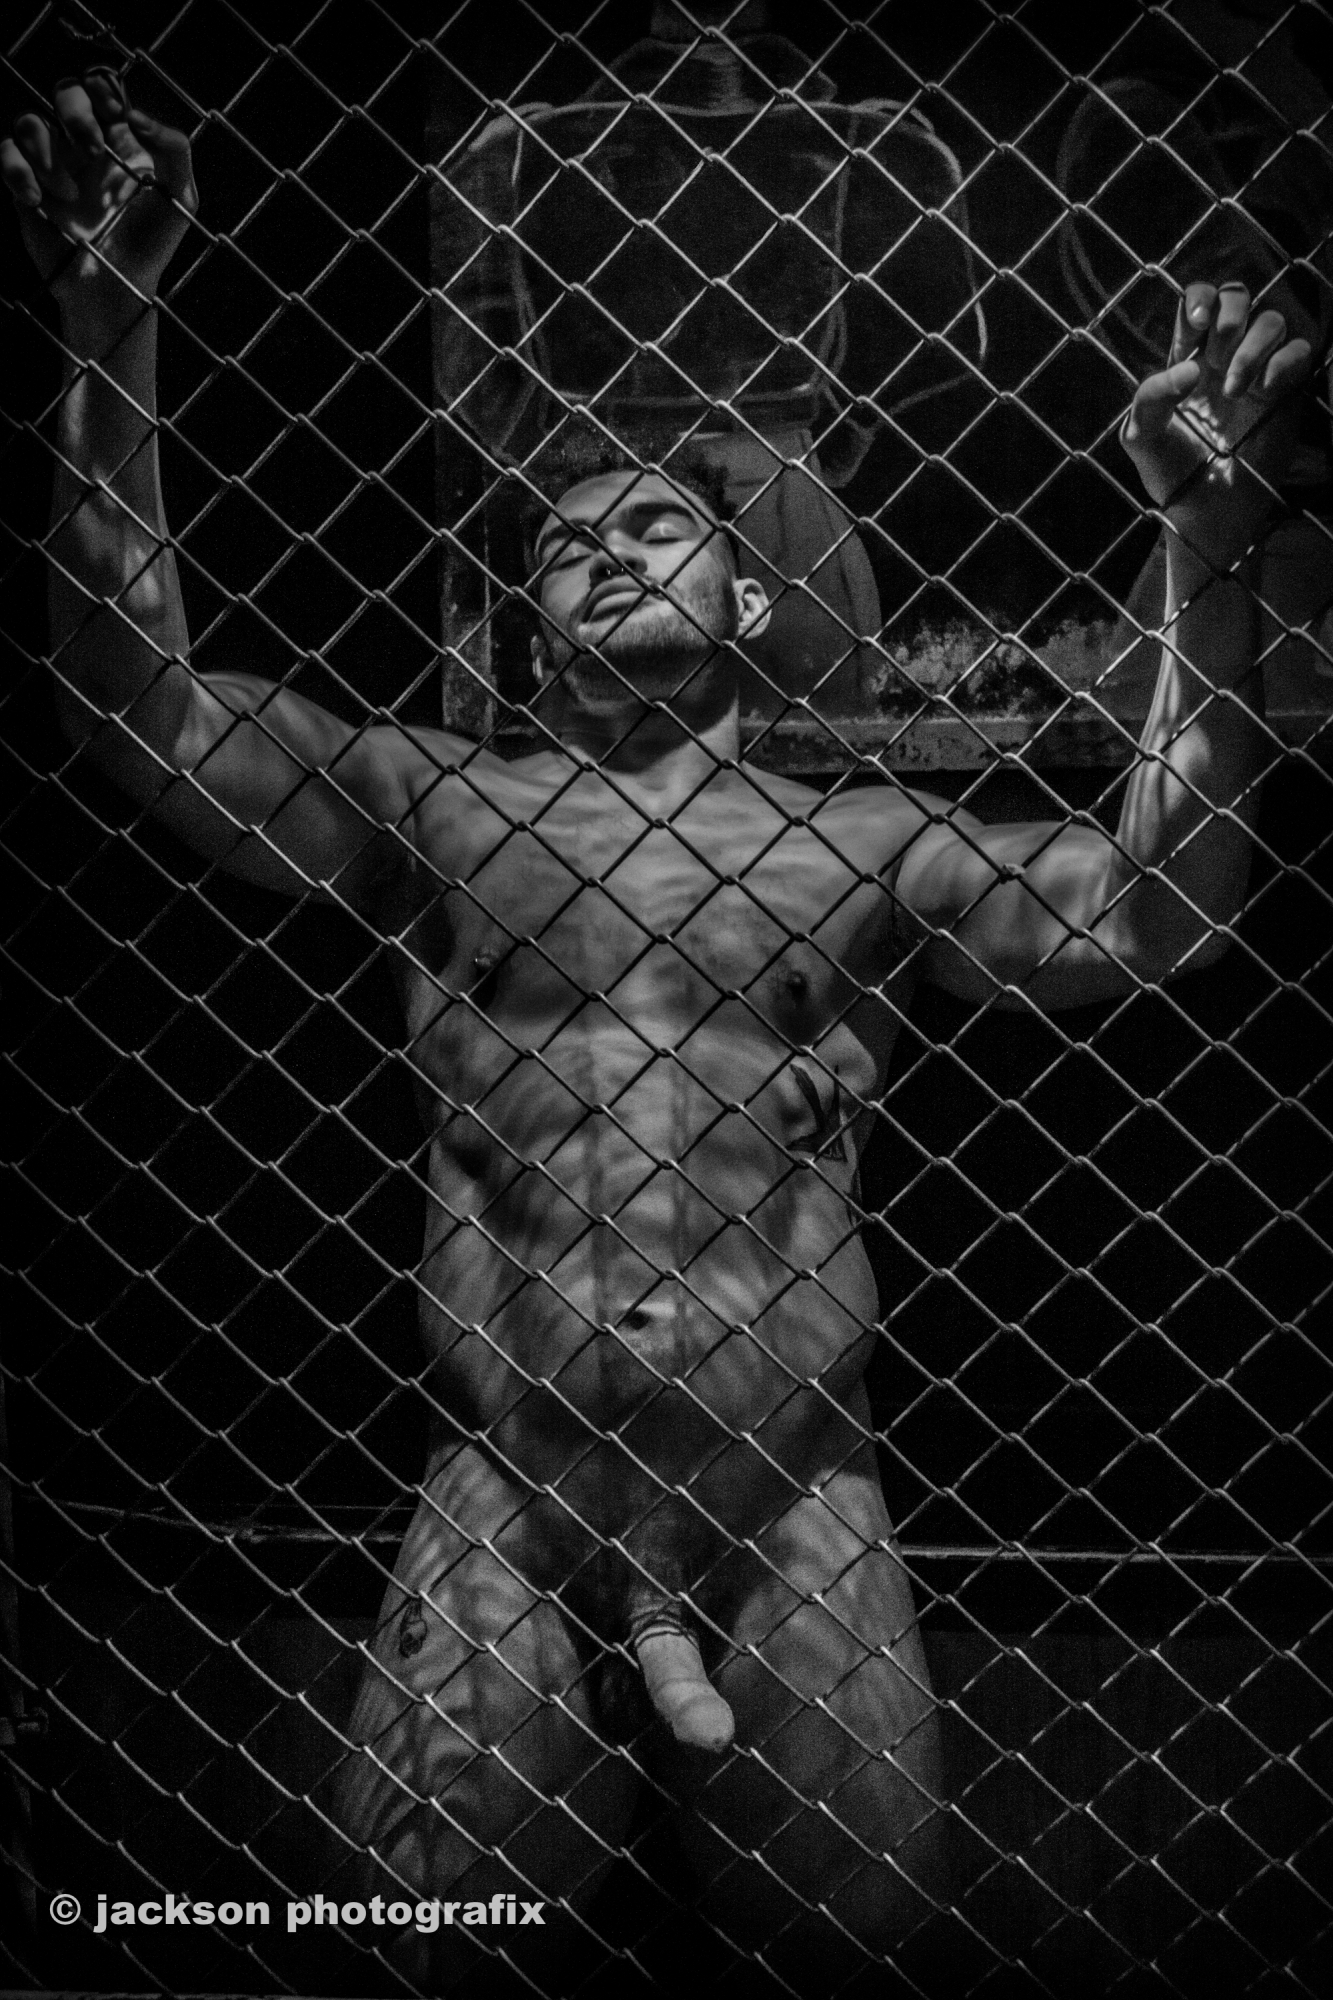 photographer jacksonphotografix homoerotica modelling photo with Not on AdultFolio. selected by jury for visual arts exhbition of  the seattle erotic arts festival 2020.